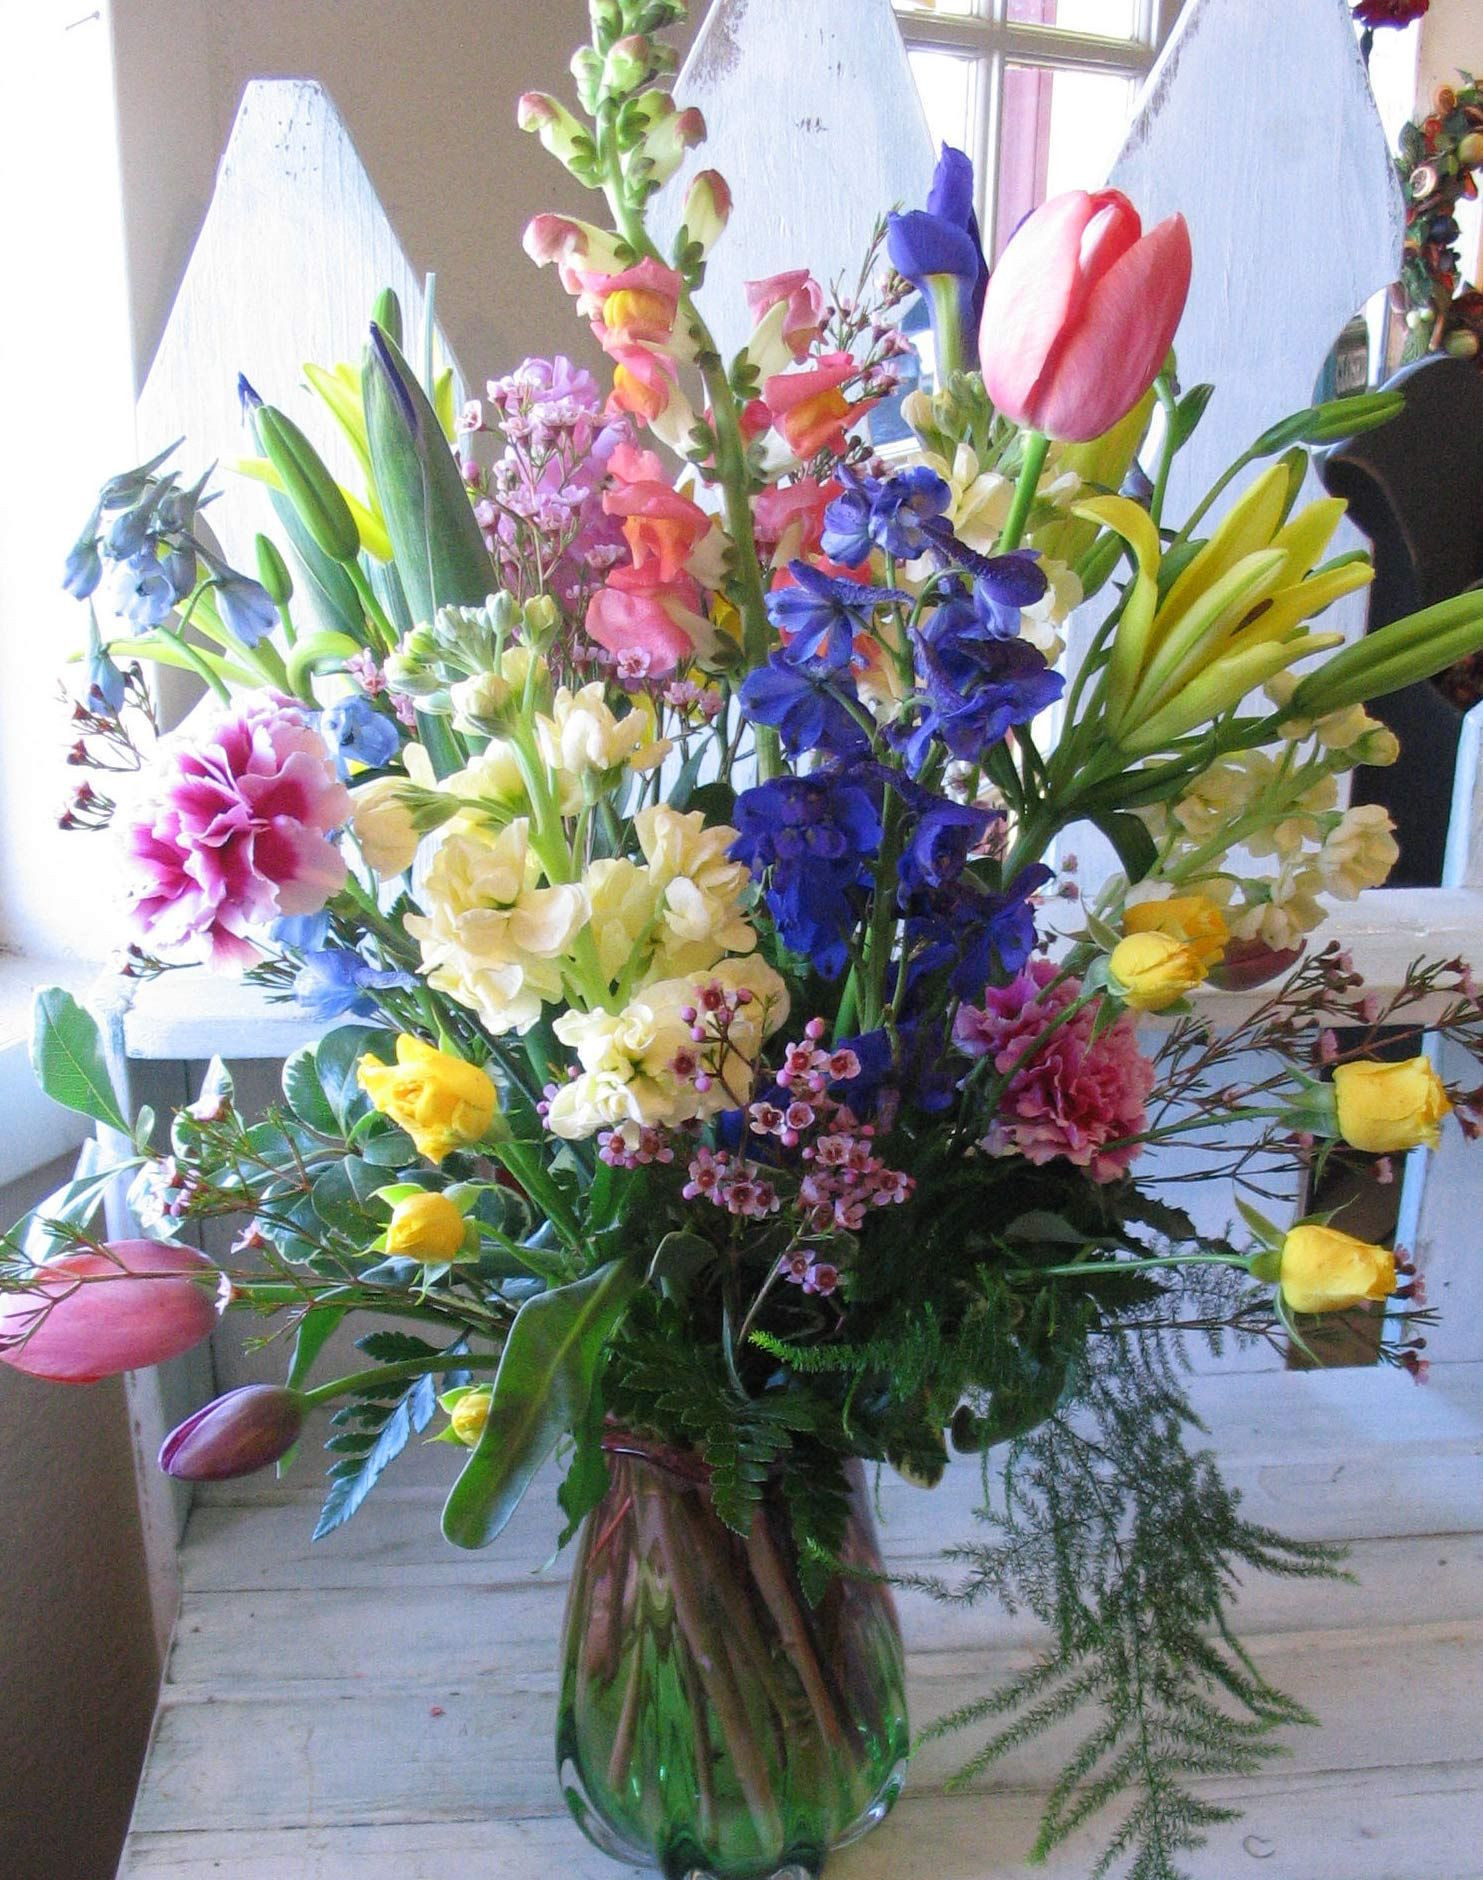 Spring Ideas Flowers
 Fresh flowers from the florist are very nice for your